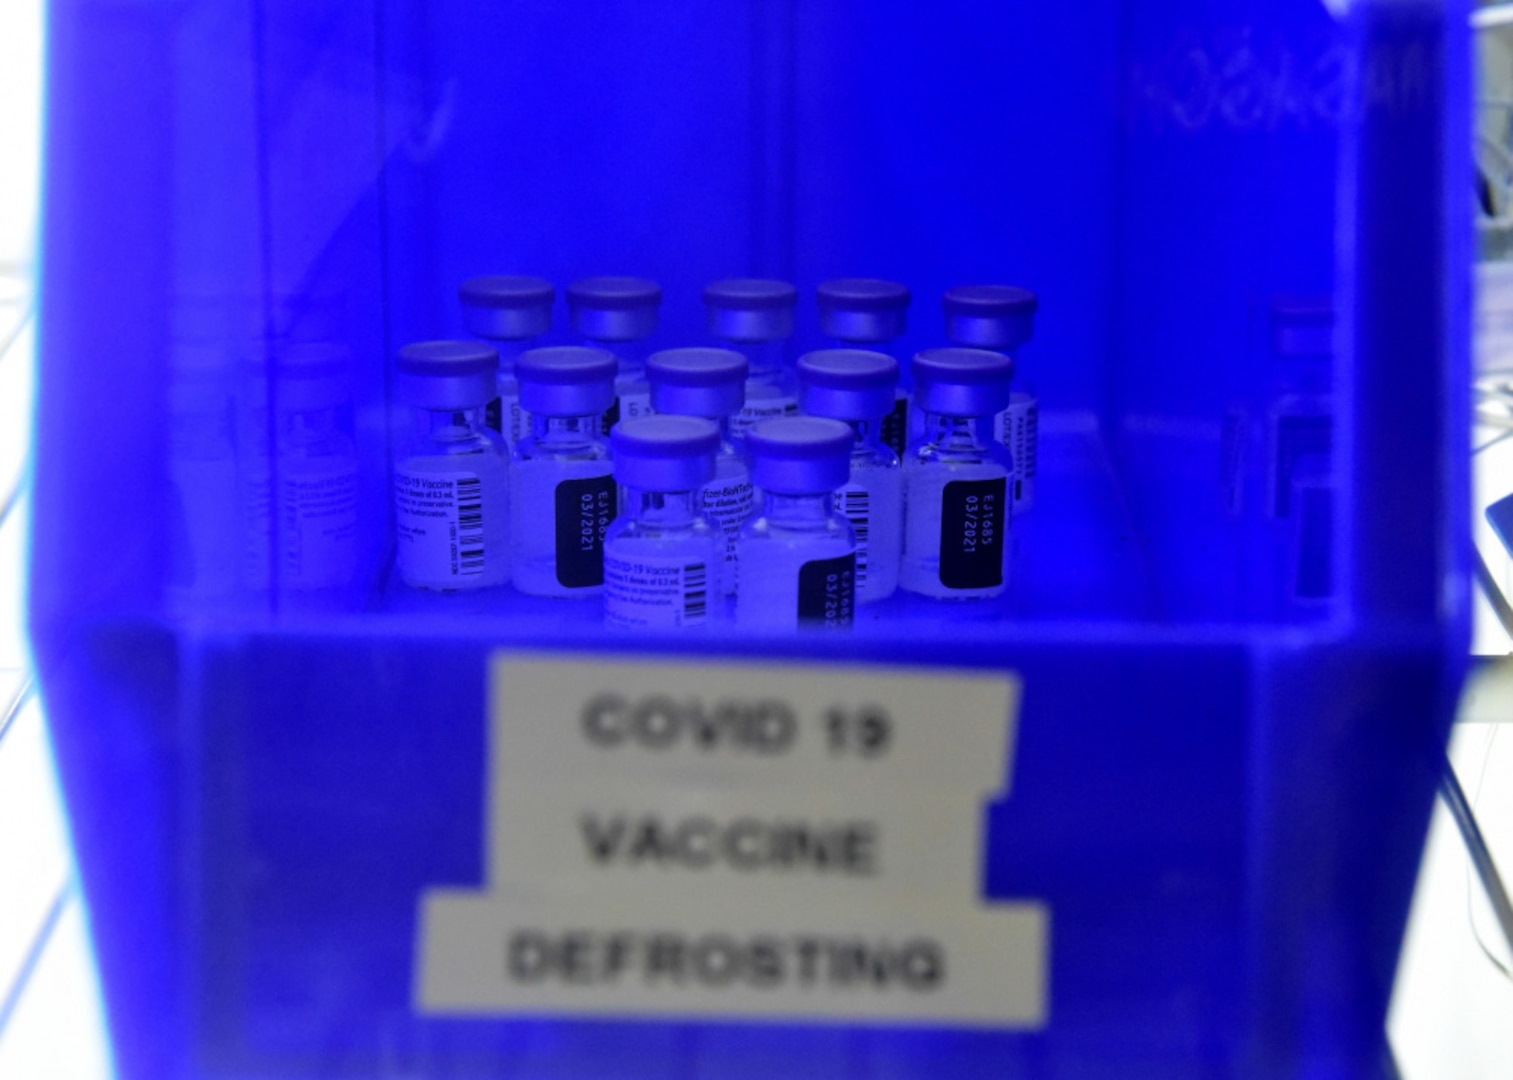 A blue container of vials labeled COVID-19 Vaccine Defrosting sits center frame.